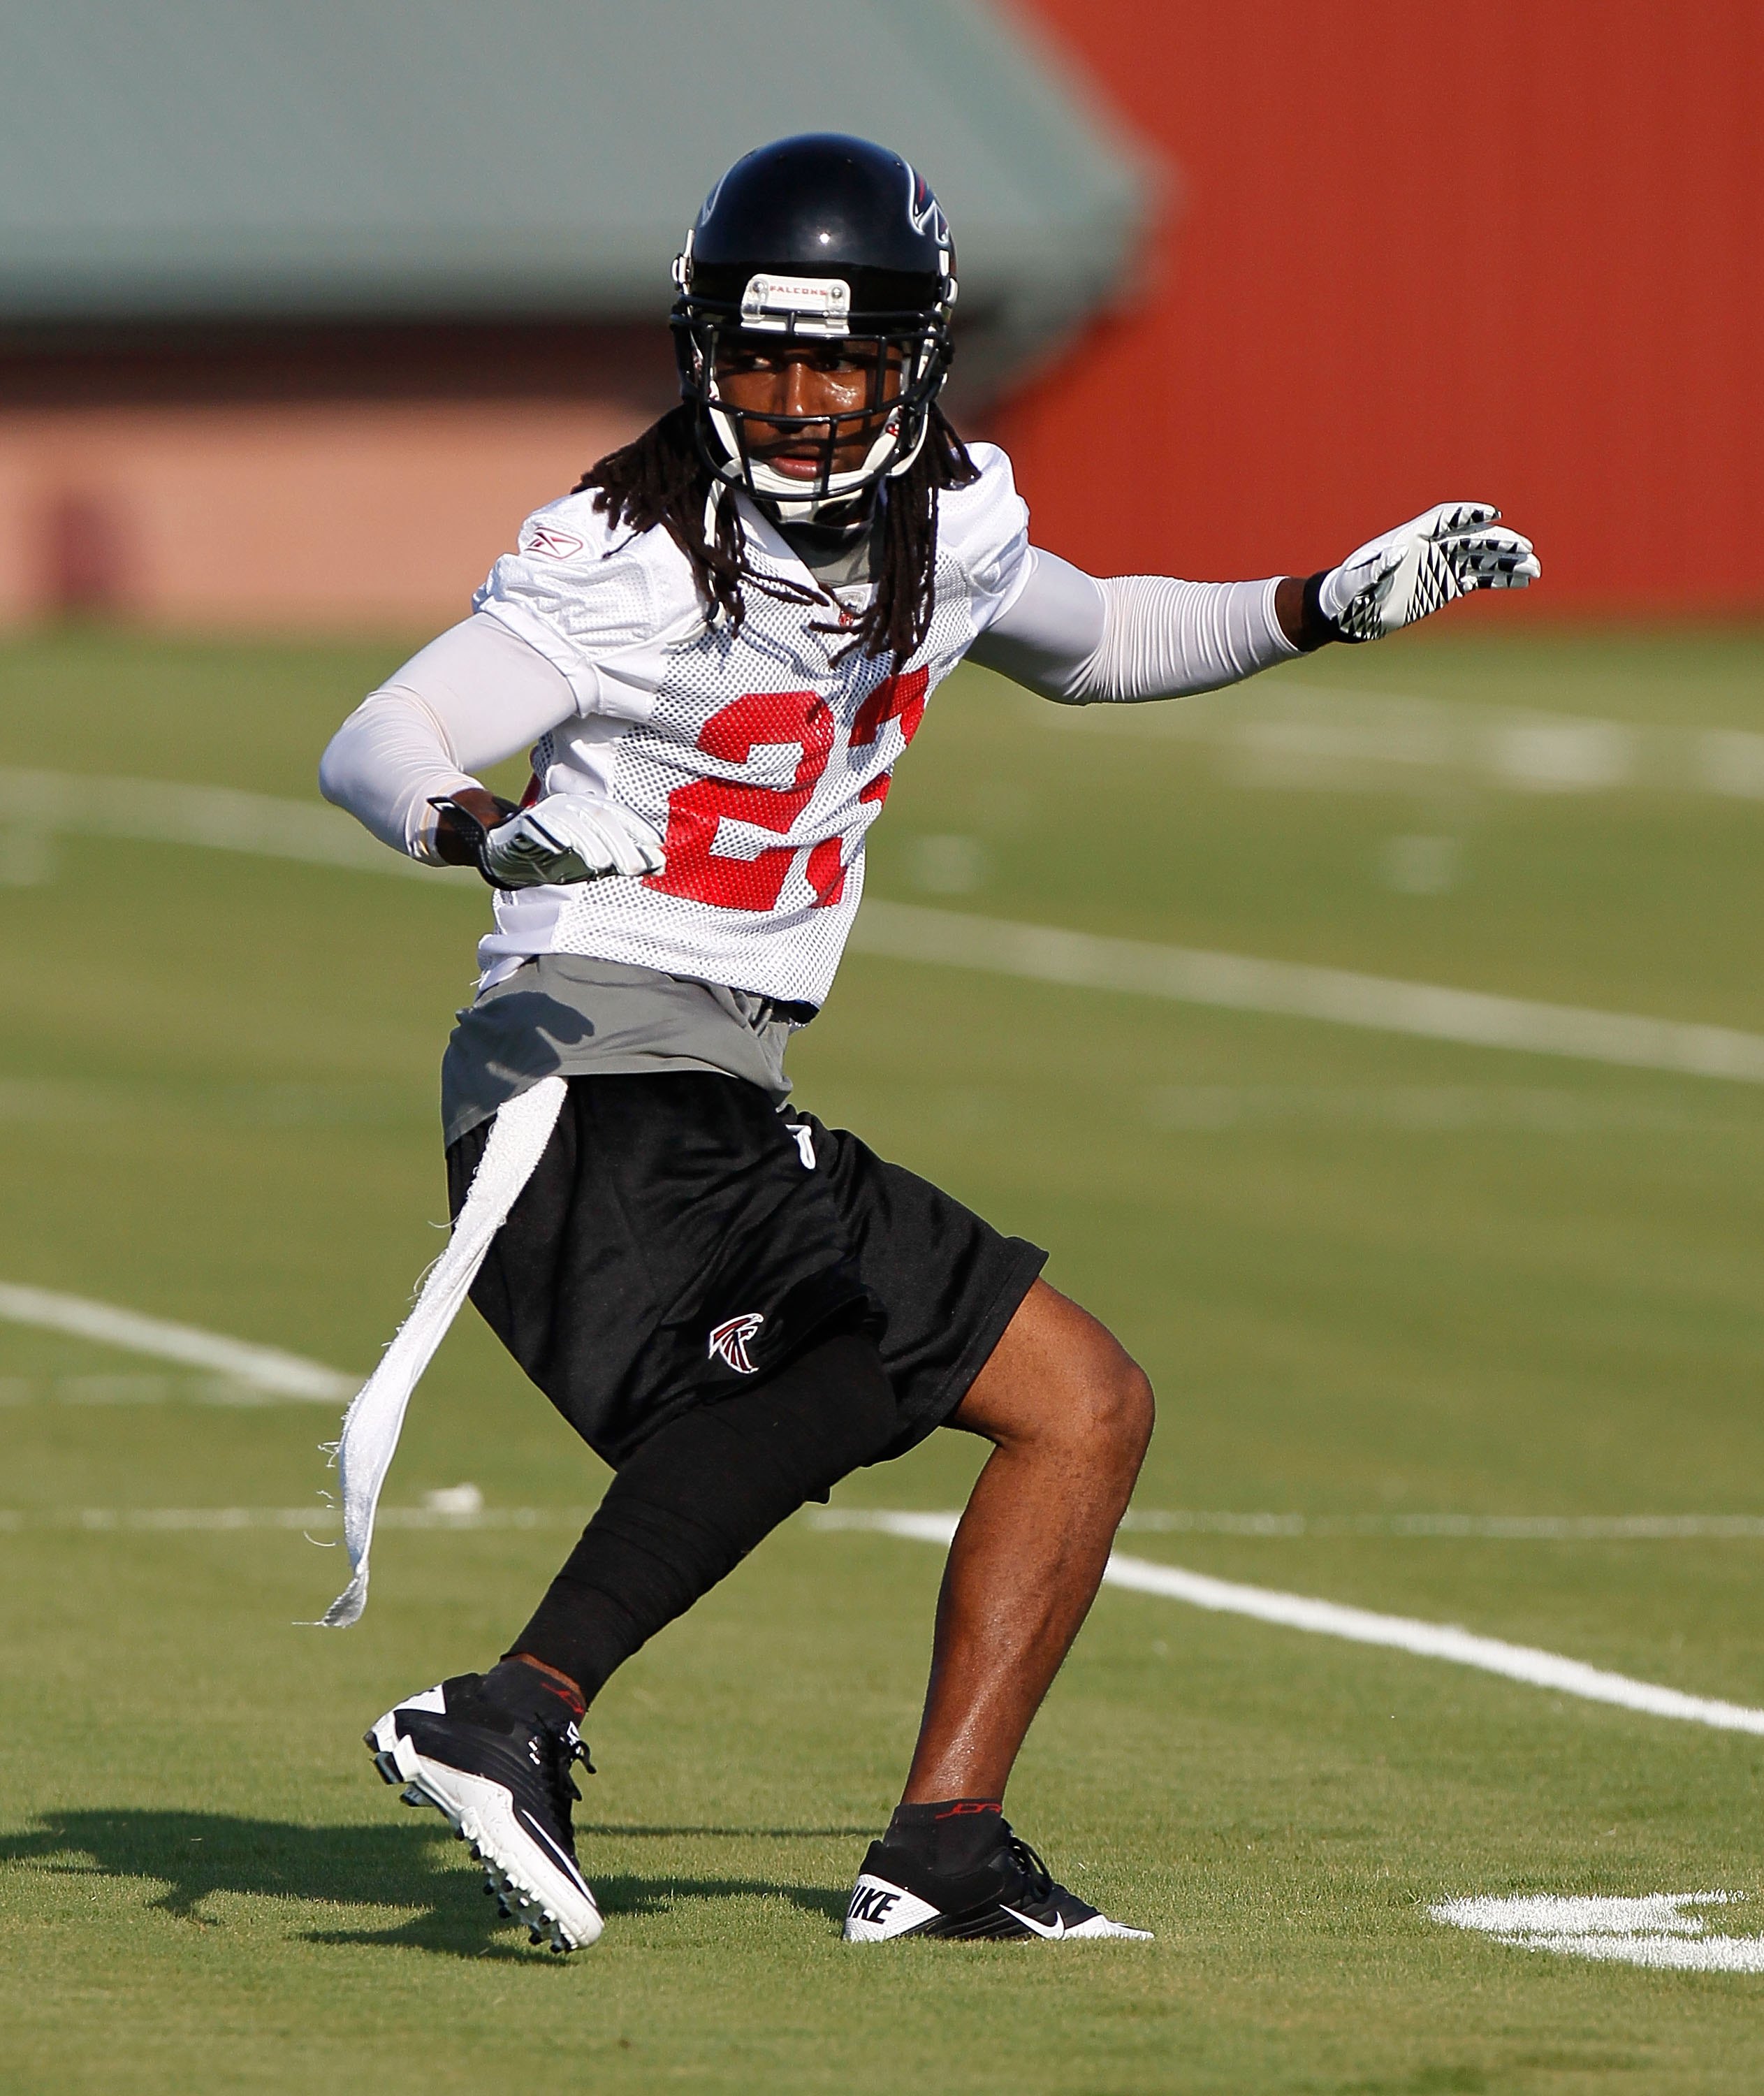 FLOWERY BRANCH, GA - JULY 30:  Dunta Robinson #23 of the Atlanta Falcons runs drills during opening day of training camp on July 30, 2010 at the Falcons Training Complex in Flowery Branch, Georgia.  (Photo by Kevin C. Cox/Getty Images)